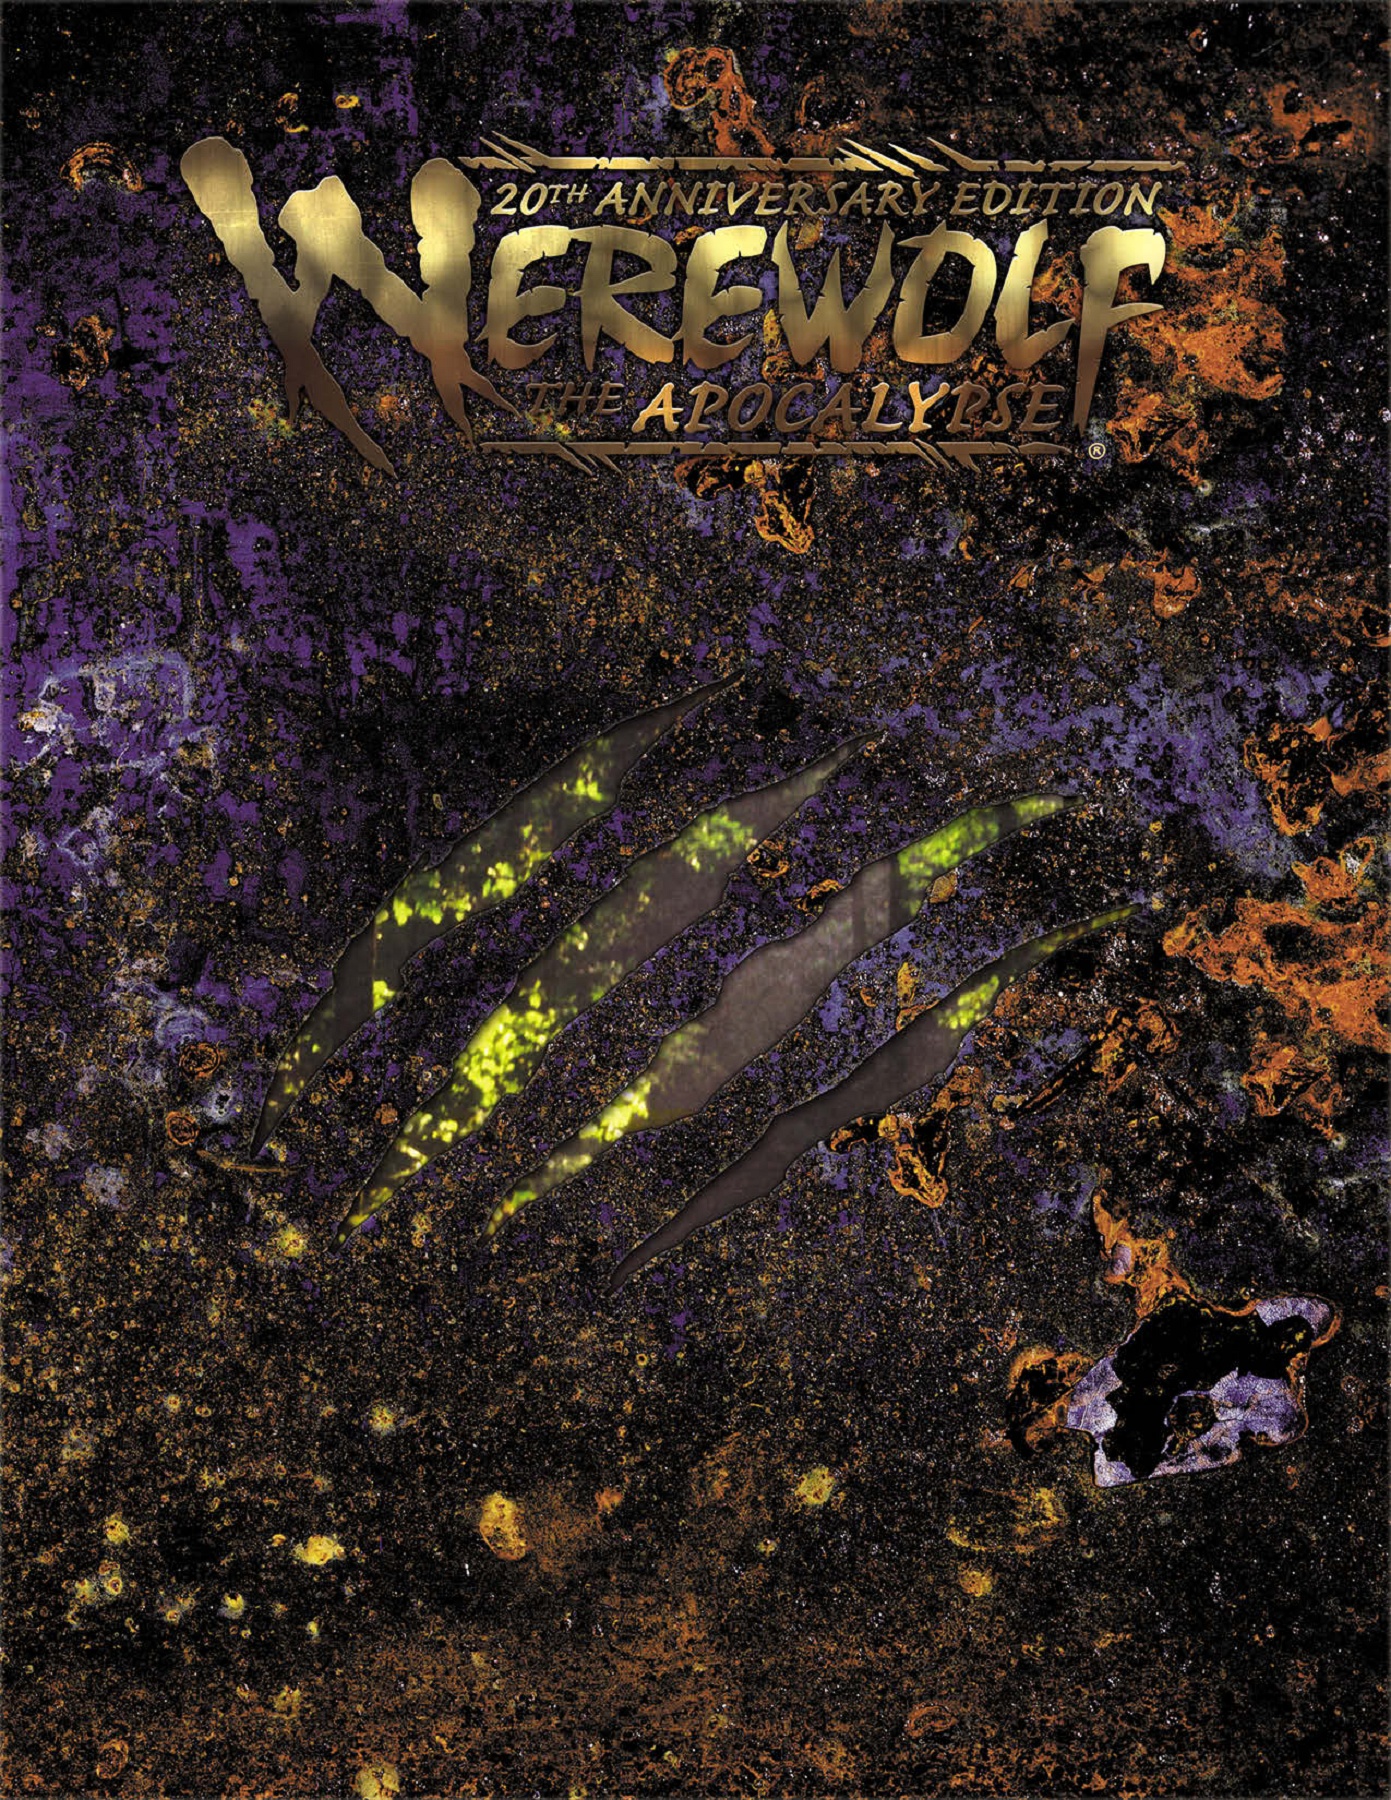 Werewolf 20 is today’s FREE offer!